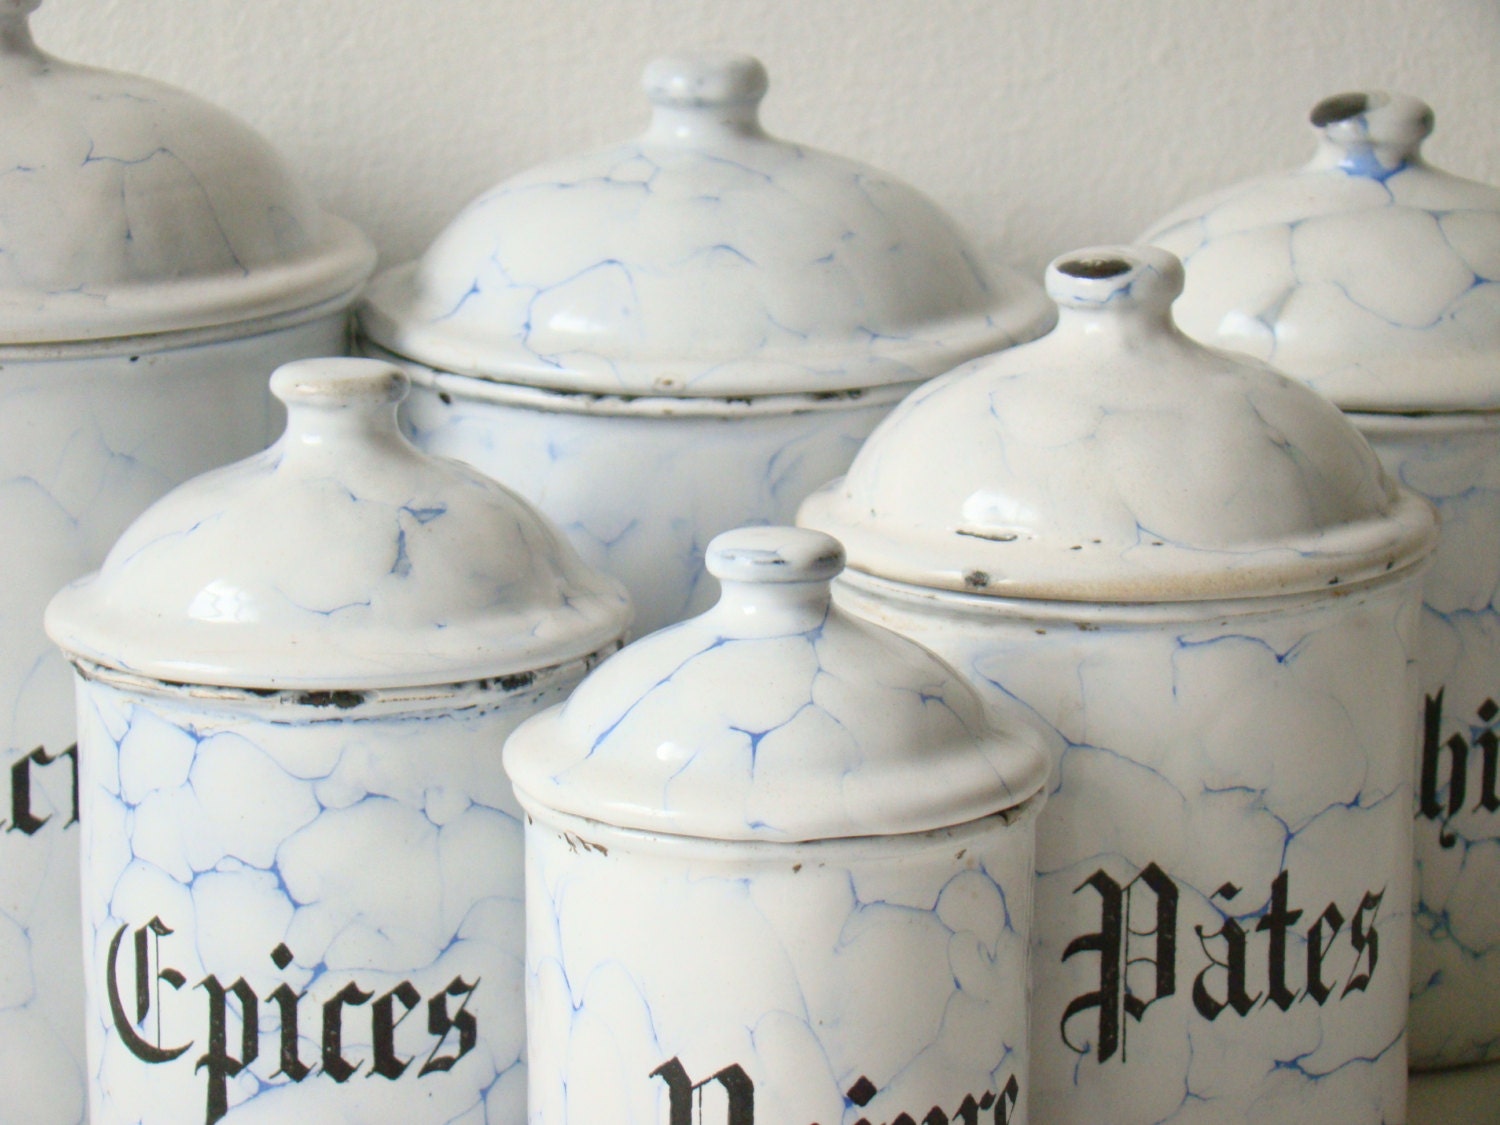 antique french enamel kitchen canisters, six vitreous enamel canisters, blue chickenwire, french shabby chic kitchen storage - culturalpollination